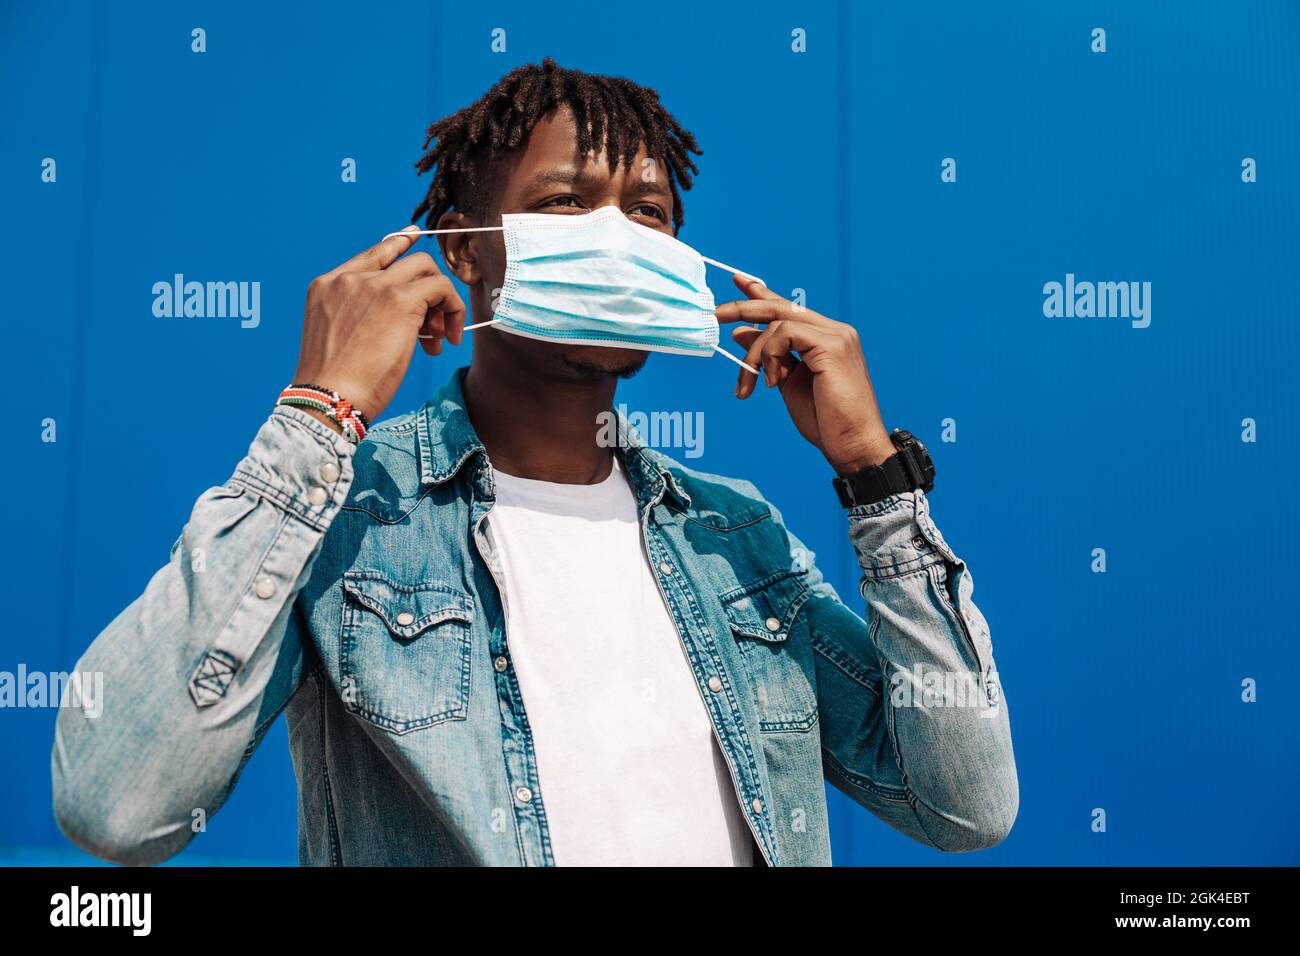 portrait of an afro american black man wearing a protective mask against coronavirus, on a blue background, guy puts a mask on his face Stock Photo